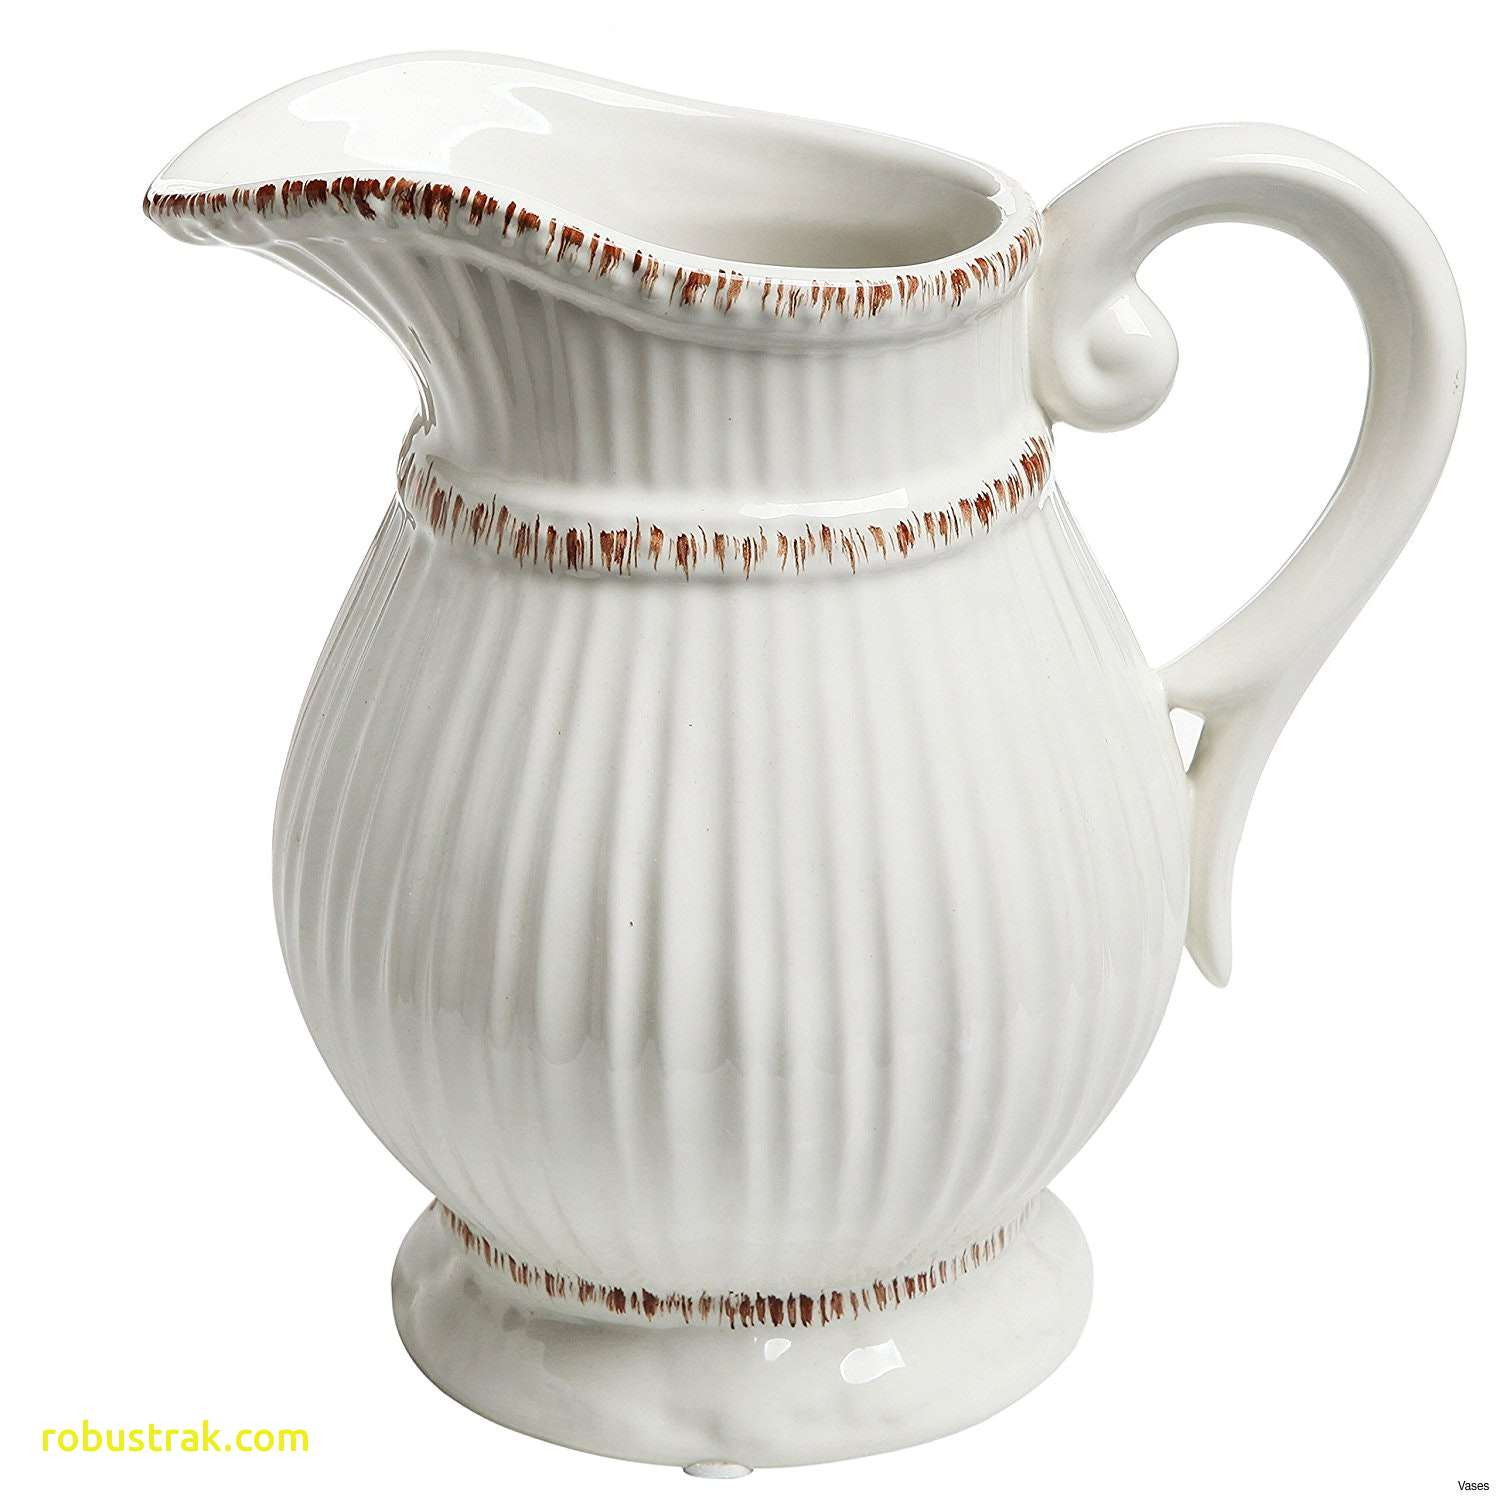 13 attractive orange Glass Vase 2024 free download orange glass vase of lovely french country ceramics home design ideas inside 817qztdtqal sl1500 h vases french country amazon white ceramic vintage style water pitcher flower vase